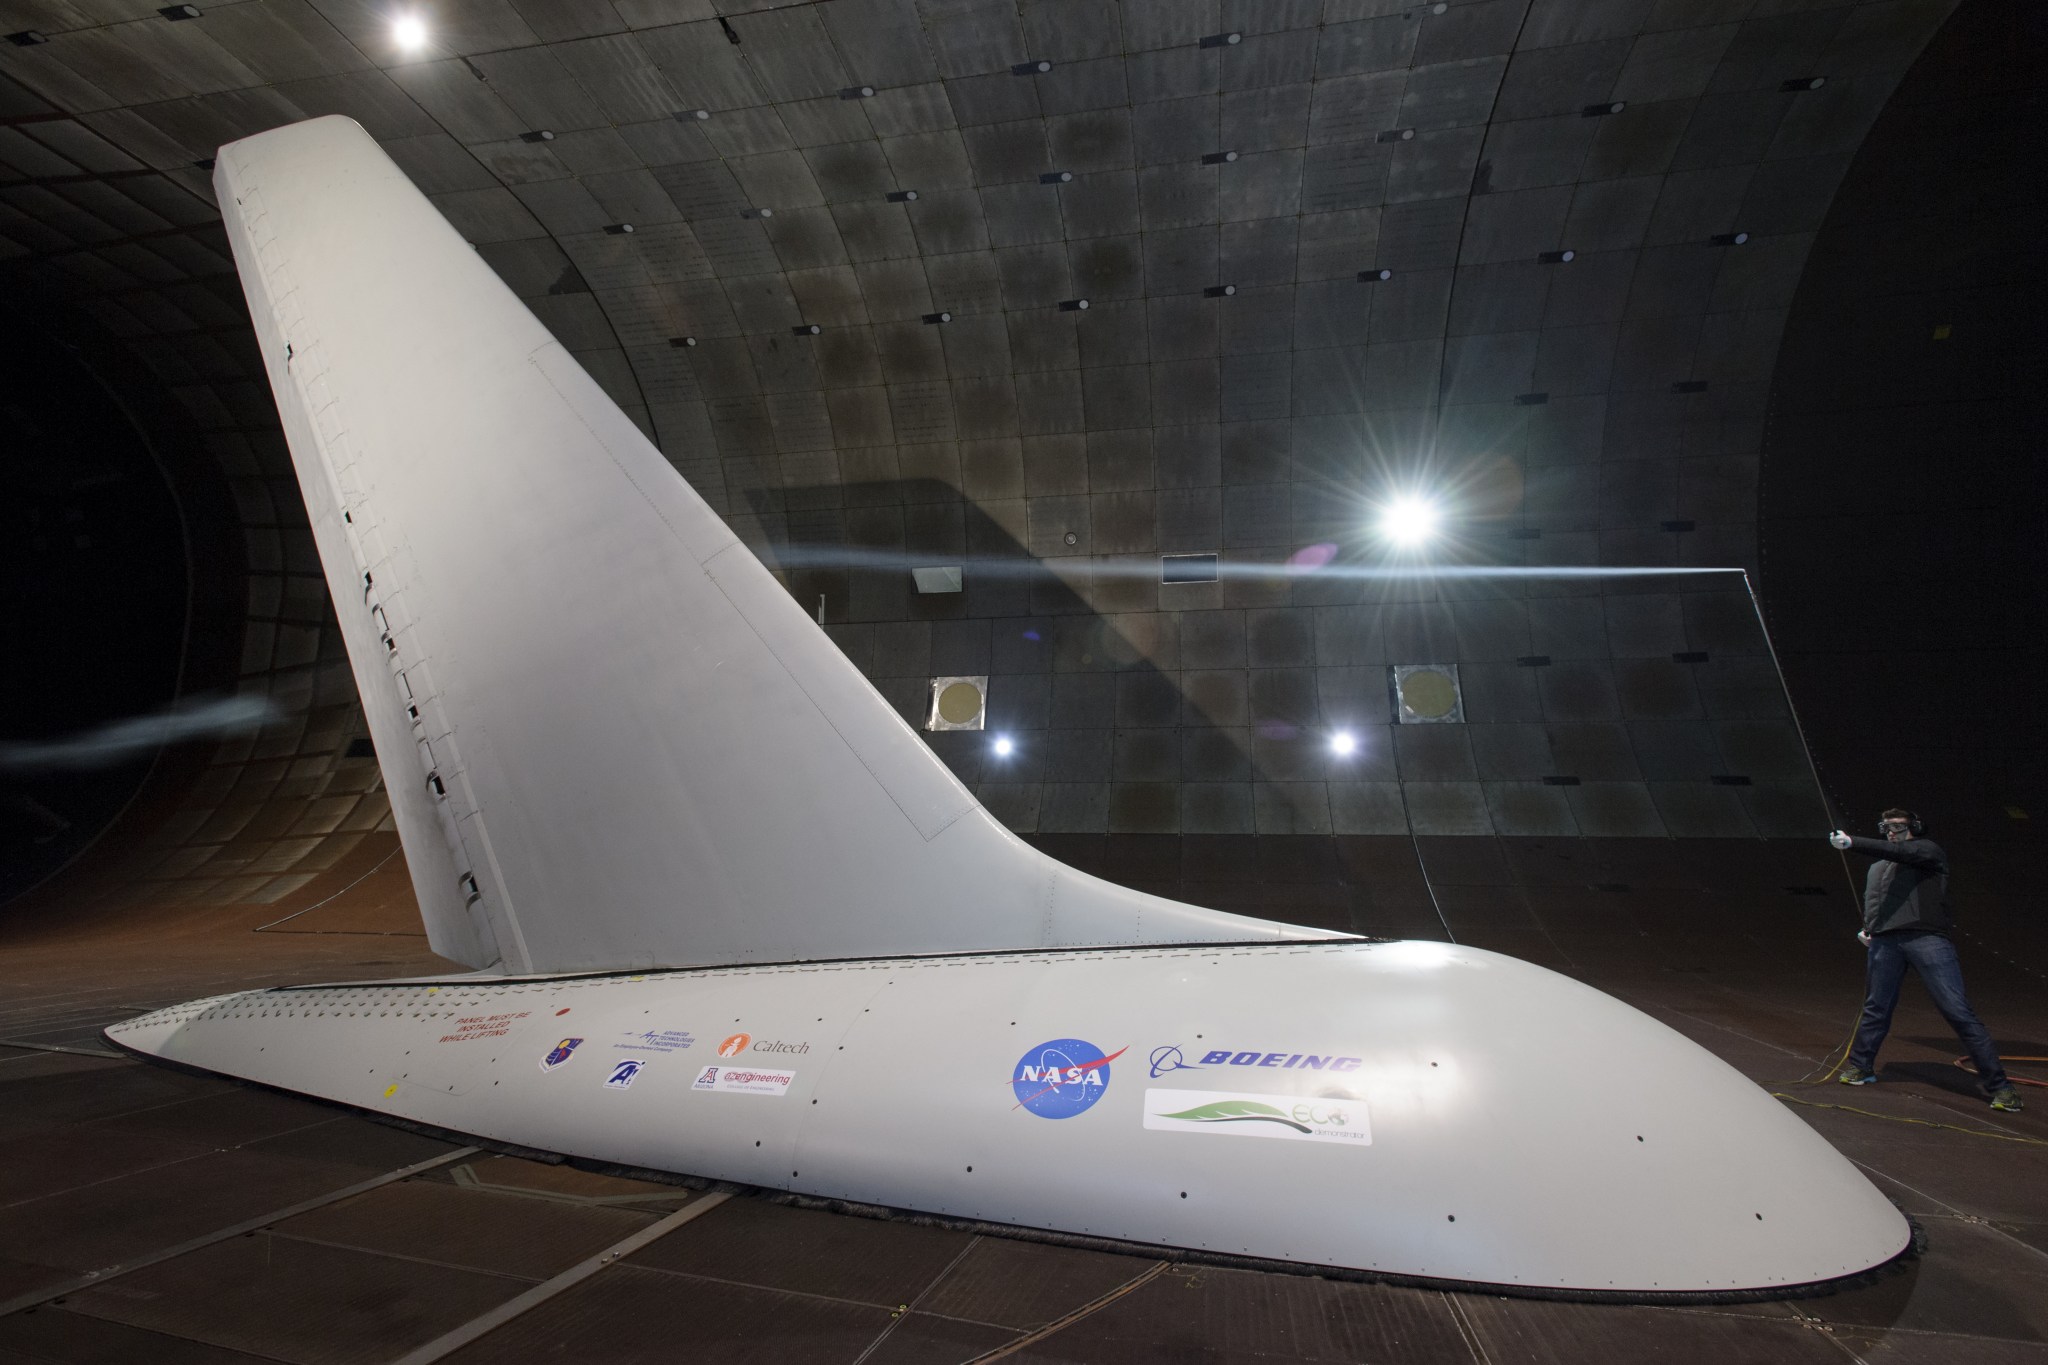 NASA recently tested a full-sized tail from a 757 commercial aircraft that was modified and equipped with tiny jets called "swee